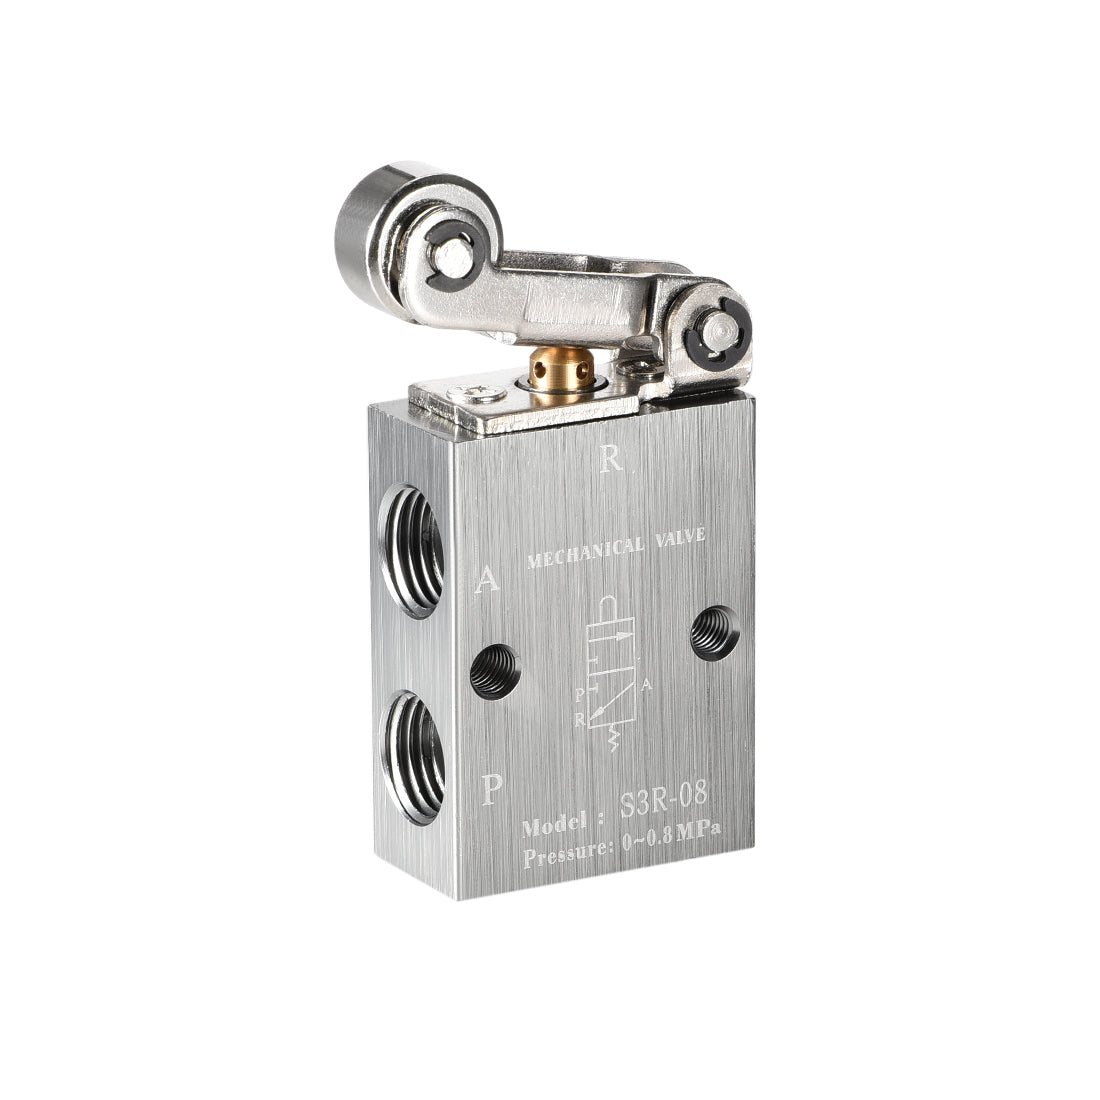 uxcell Uxcell S3R-08 2 Position 3 Way  1/4" PT Manual Hand Pull Pneumatic Solenoid Mechanical Valve